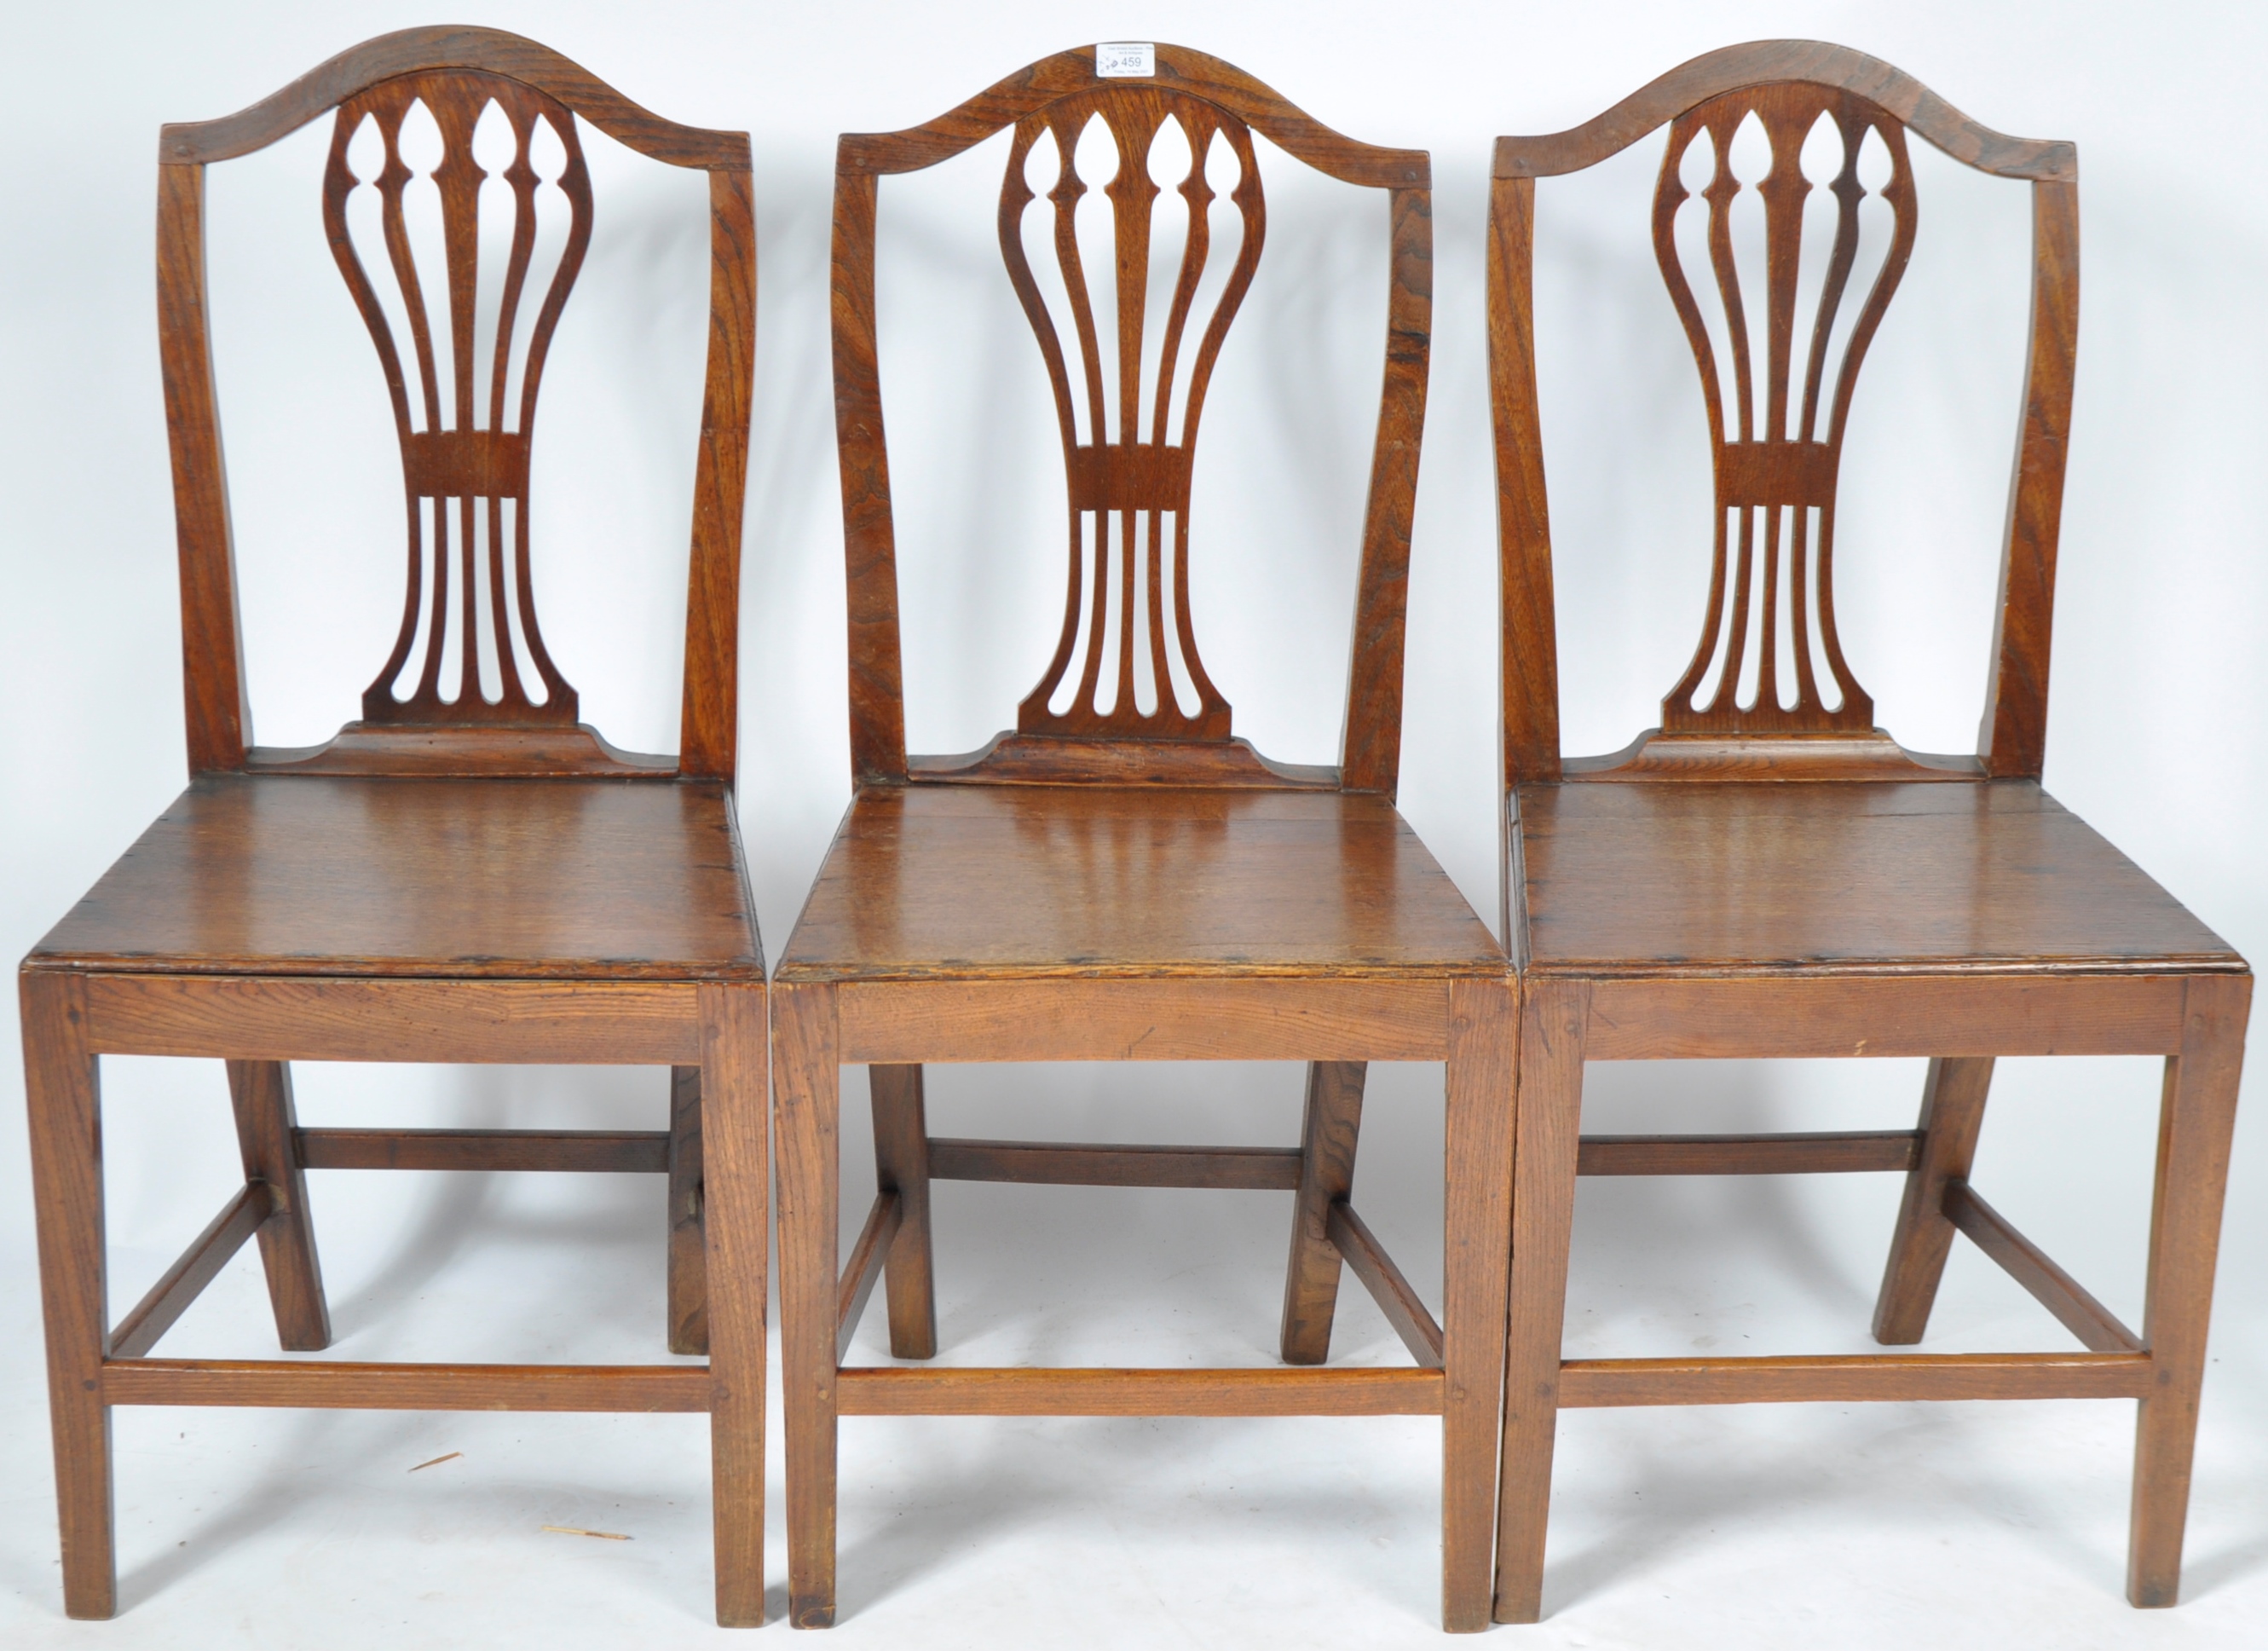 SET OF SIX 18TH CENTURY CHIPPENDALE STYLE OAK & ELM DINING CHAIRS - Image 8 of 11